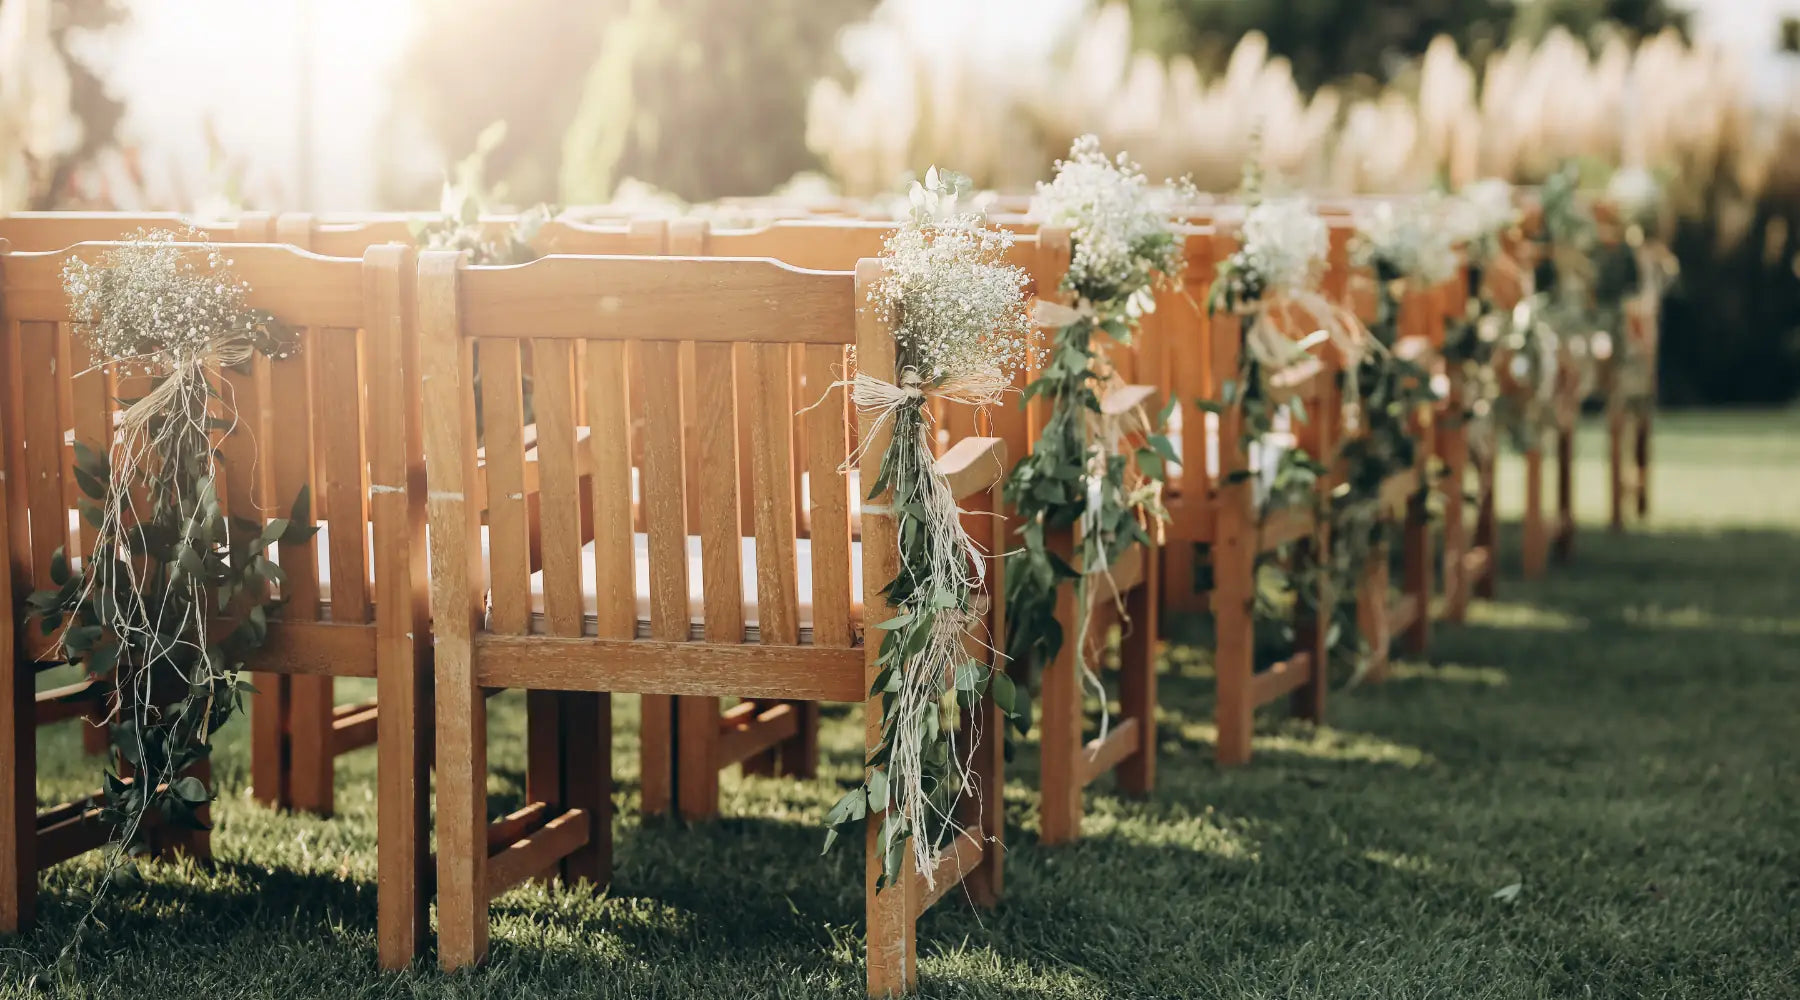 3 Wedding Tasks You Can Do To Reduce Your Event's Carbon Footprint